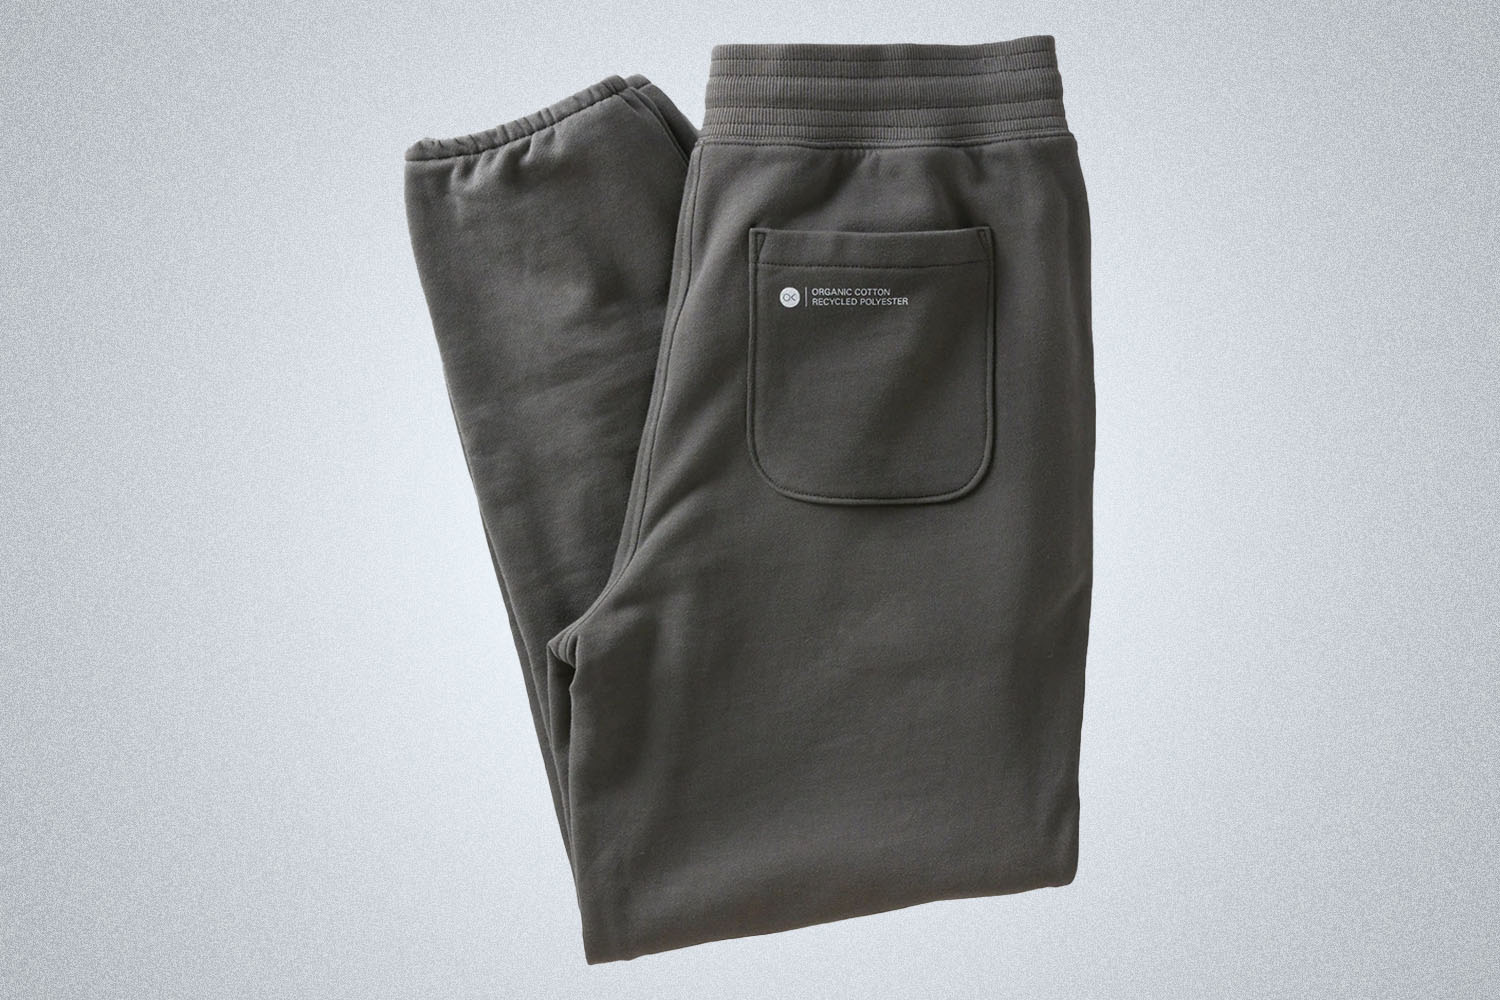 A pair of Grey sweatpants from Outerknown on a light grey background